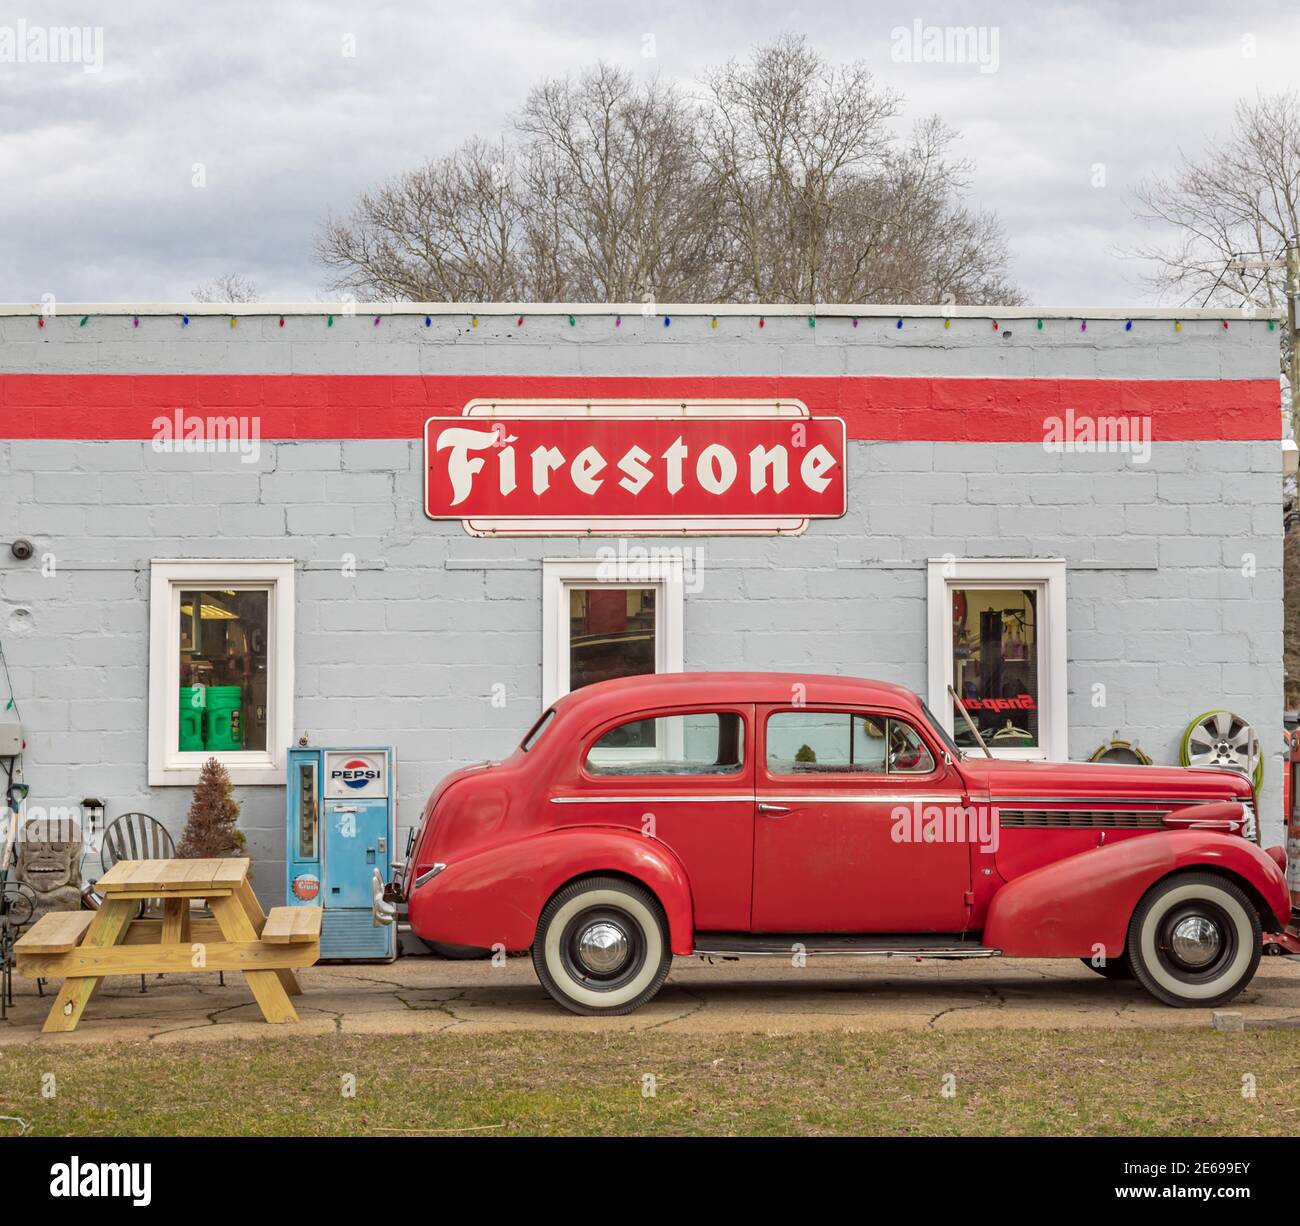 1940s car next to an old building with a firestone sign Stock Photo